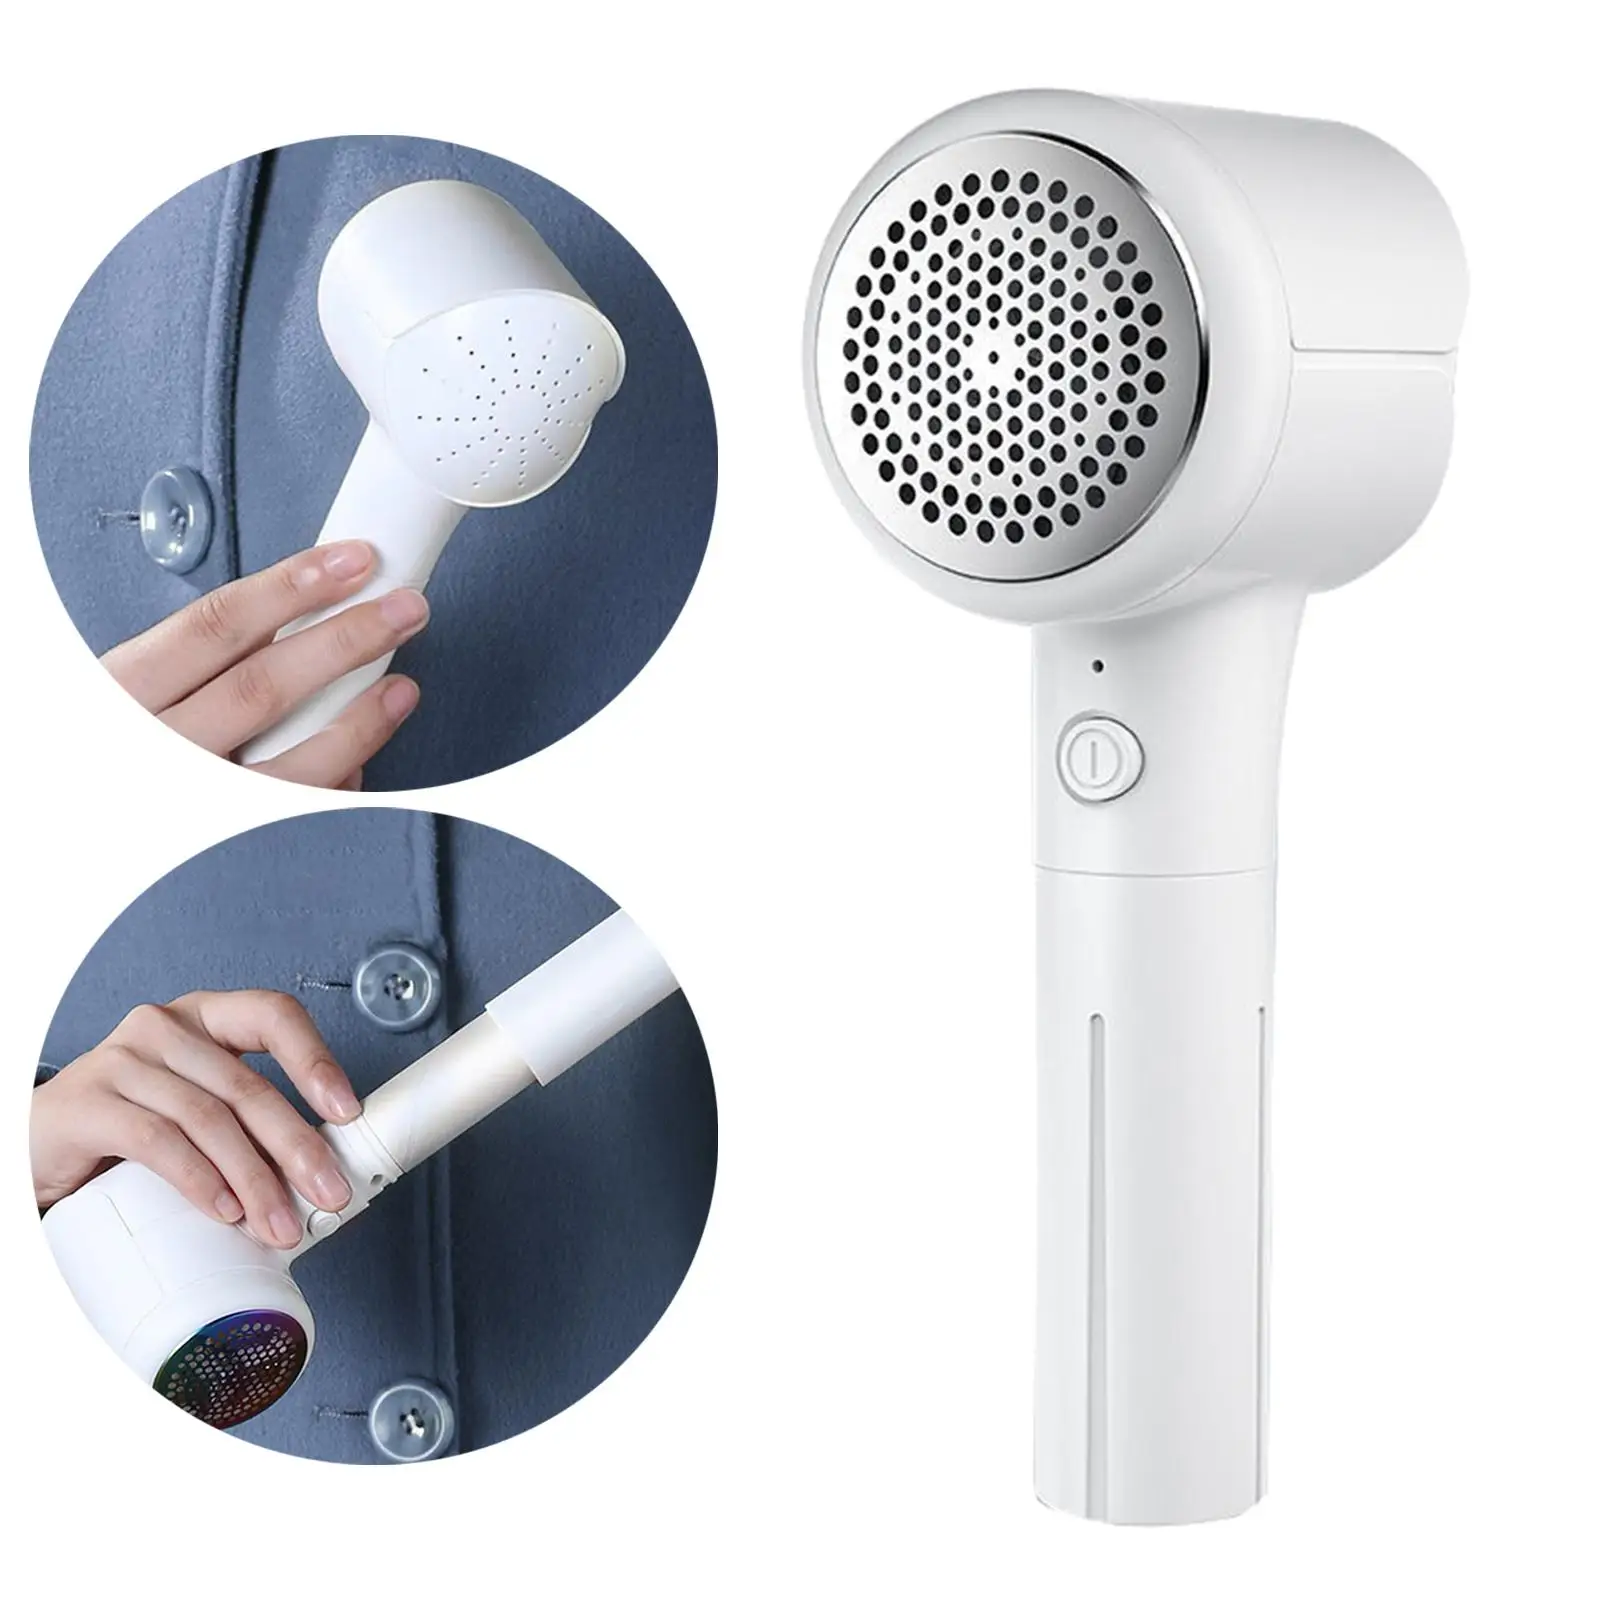 Wireless Lint Remover Stainless Steel Blade Removal Removal Tool Trimmer Portable Lint Shaver for Bedding Cotton Sweater Blanket